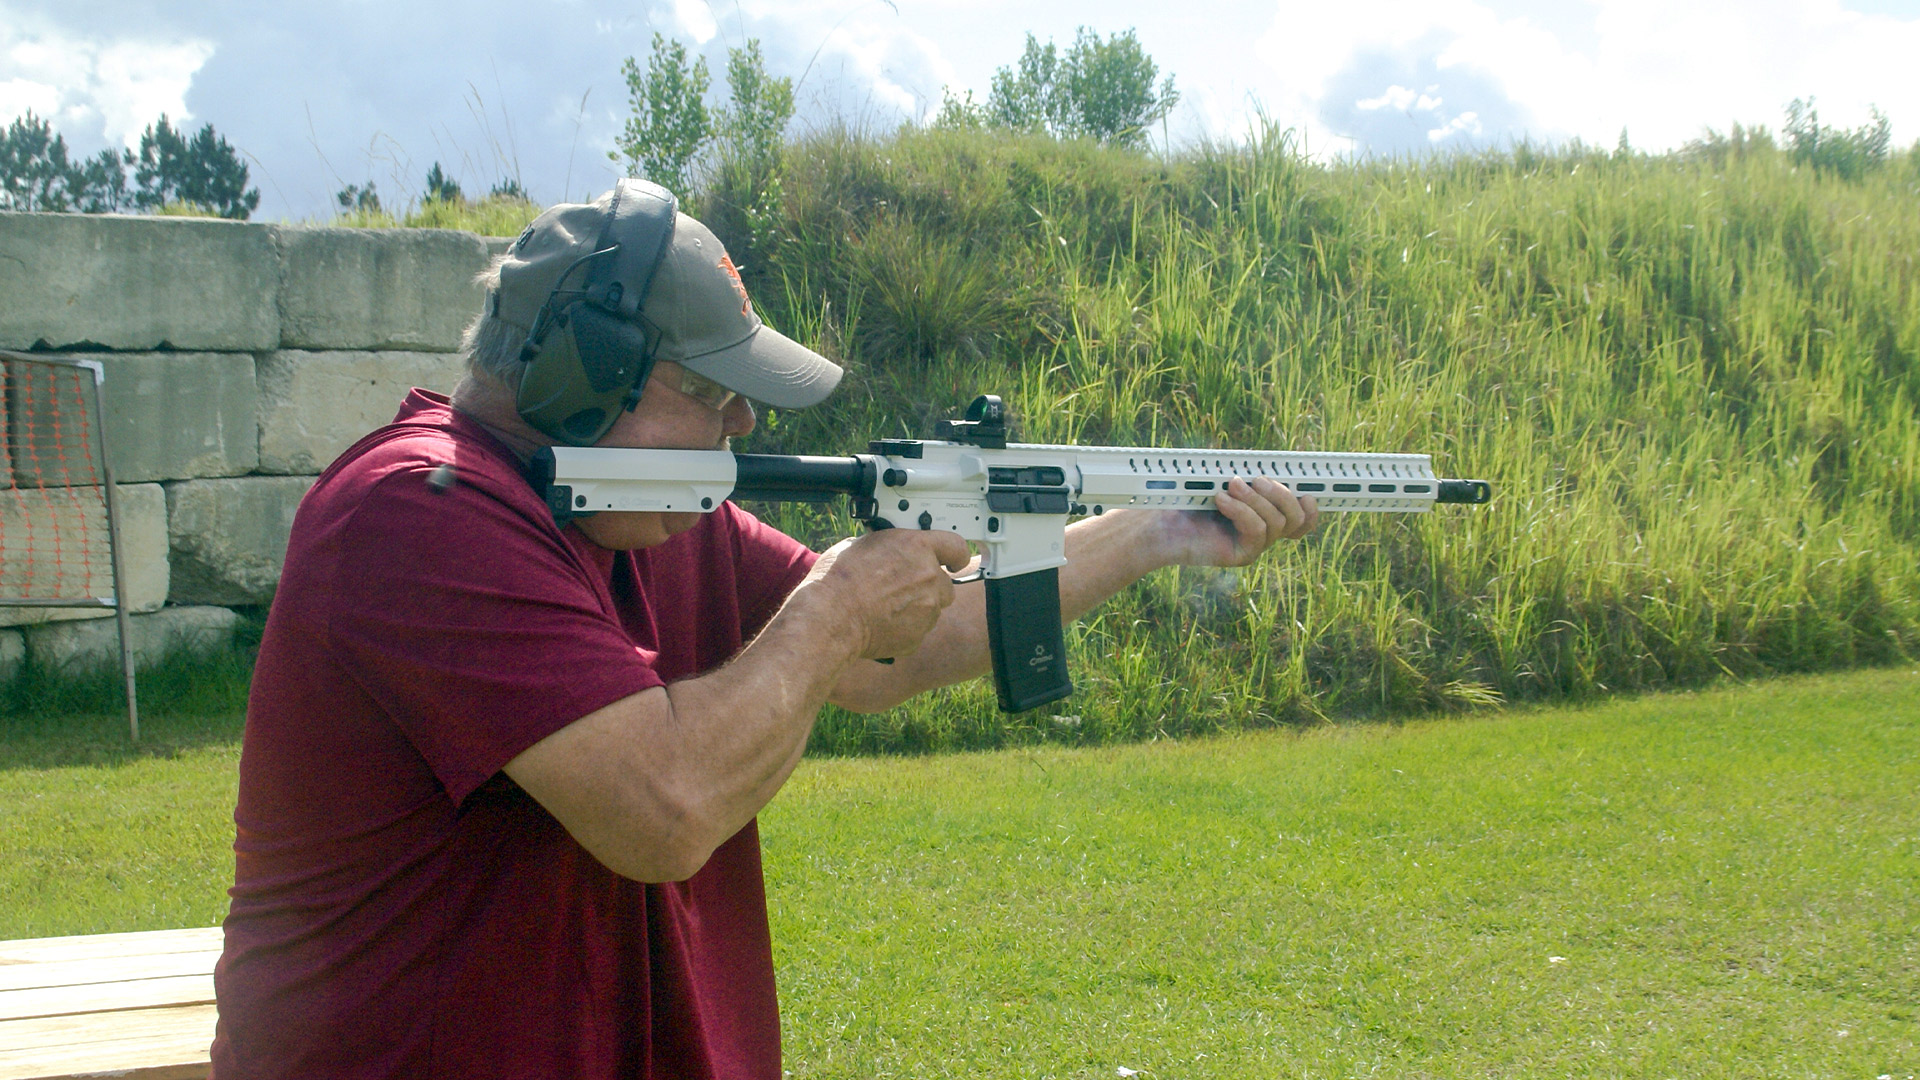 Shooting the CMMG Resolute Mk4 PCC 9mm in Florida